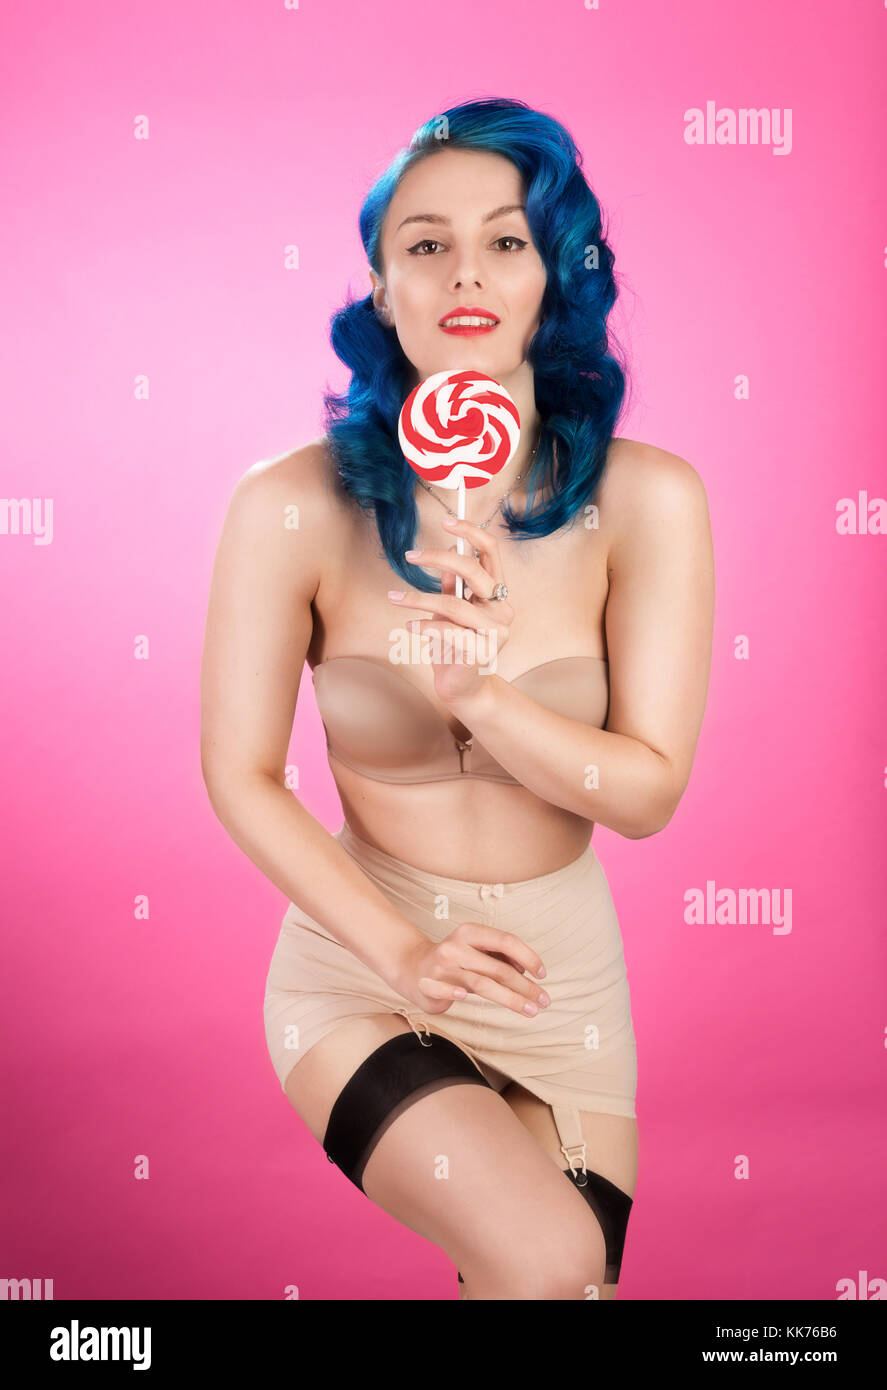 Pin up cheeky girl with candy lollipop Banque D'Images